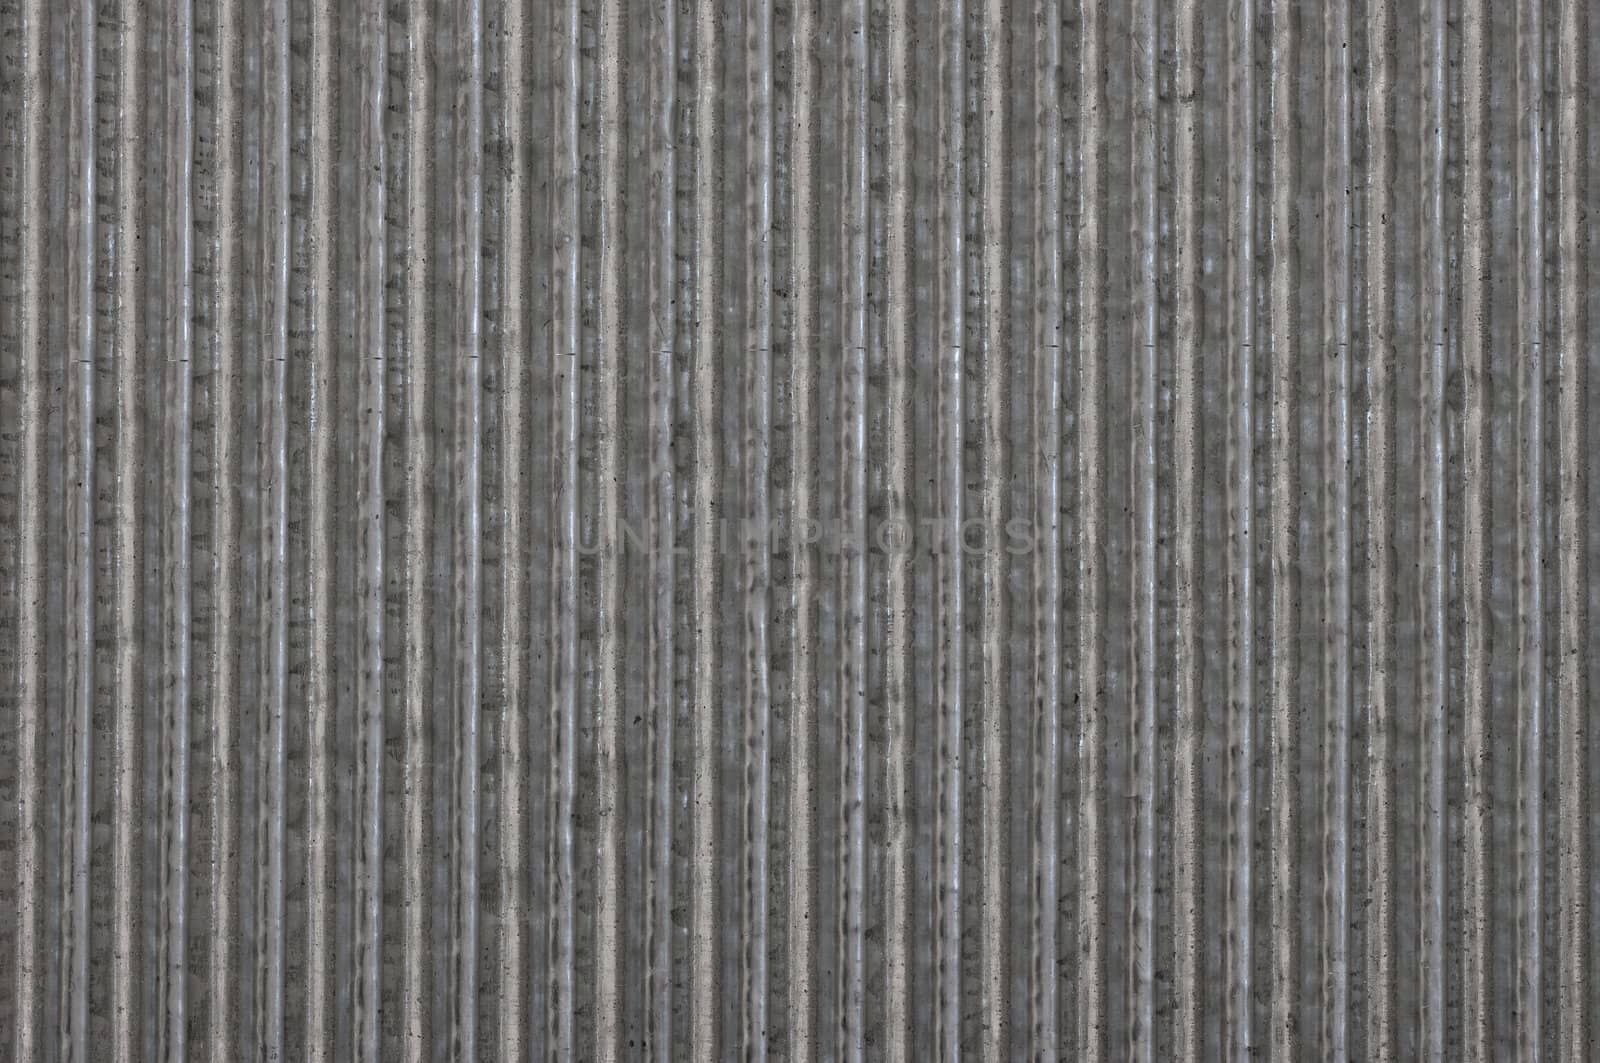 A pattens with steel lines, for backgrounds or textures